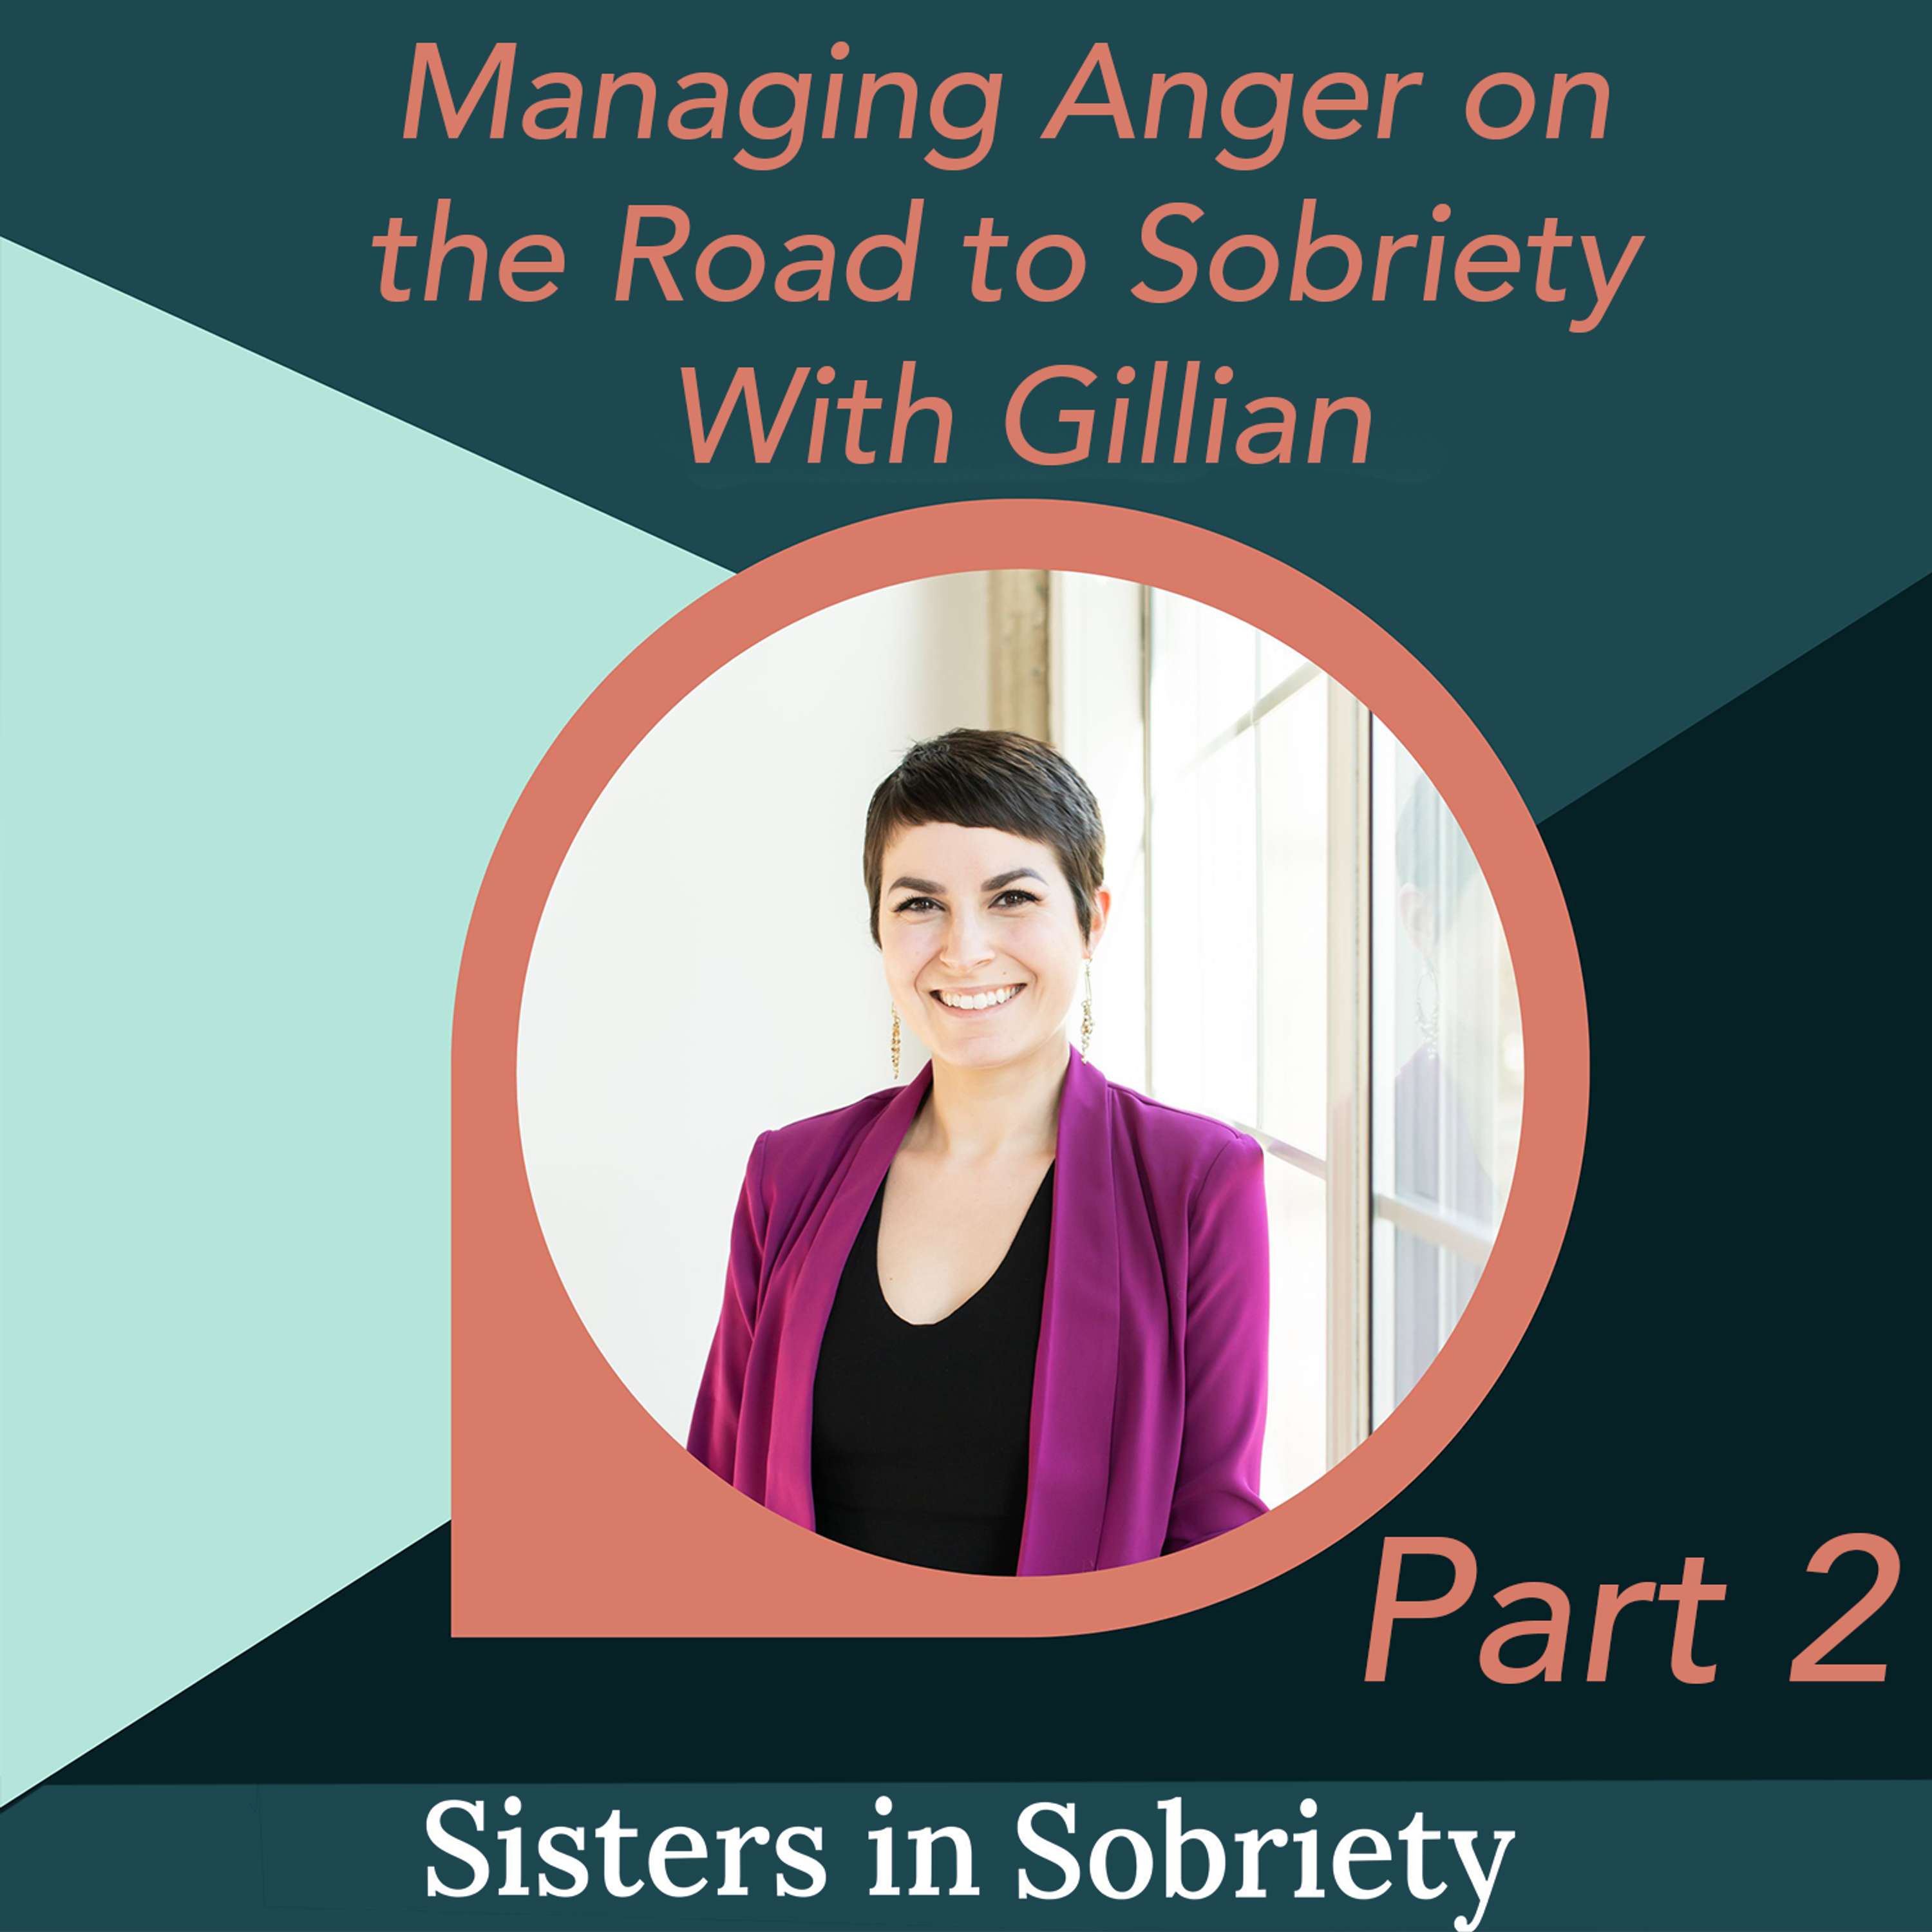 Managing Anger on the Road to Sobriety With Gillian Tietz